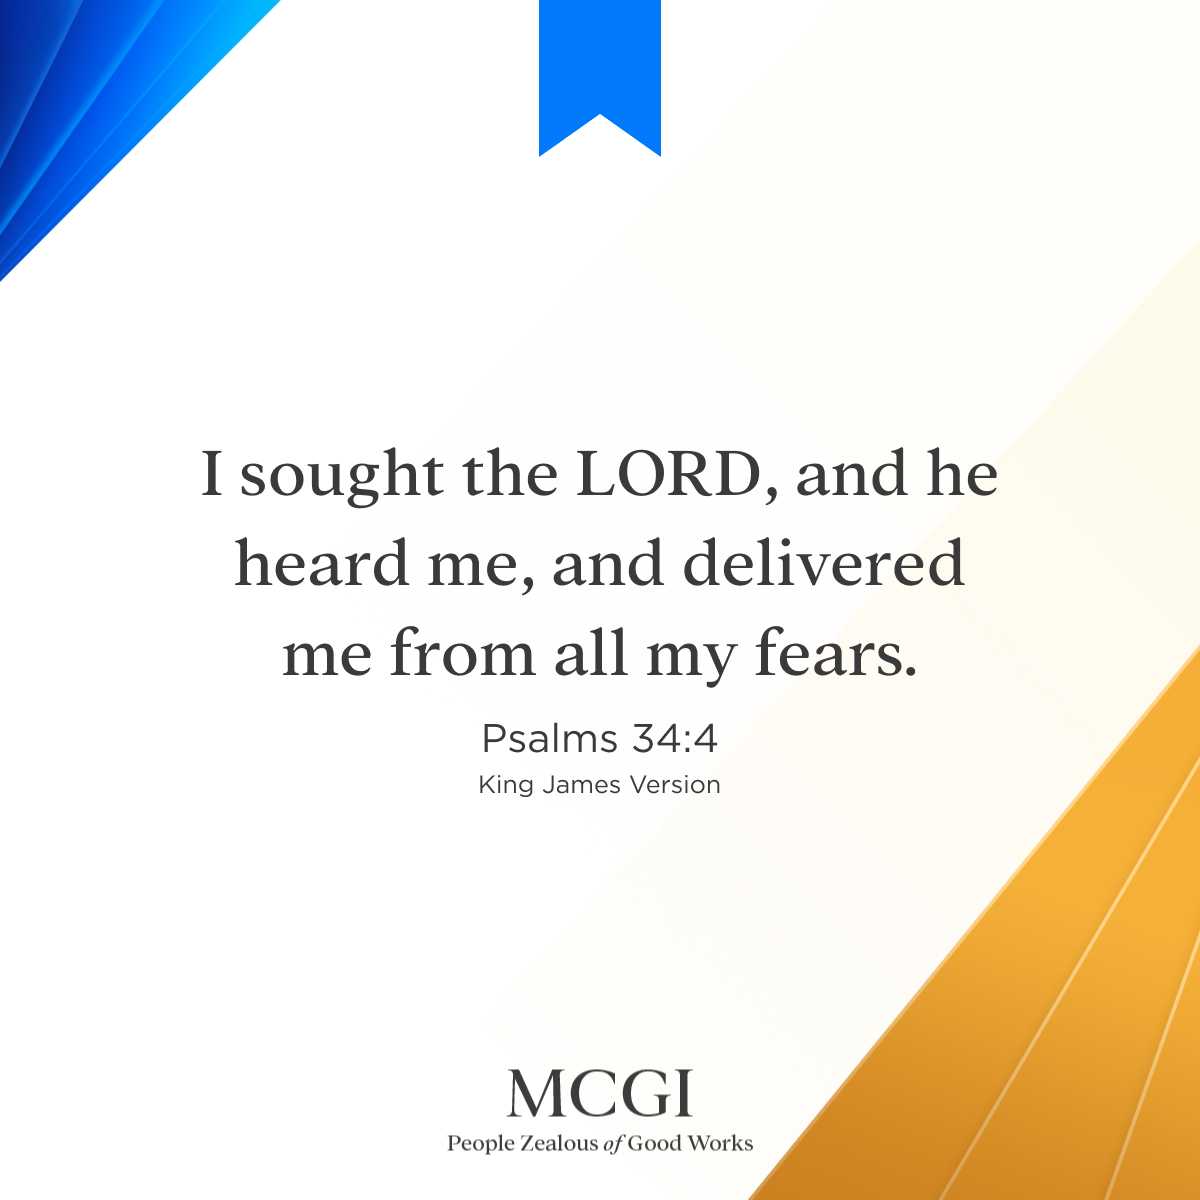 I sought the LORD,and he heard me, and delivered me from all my fears: Psalms 34.4 King James Version MCGI People /ealous of Good Works